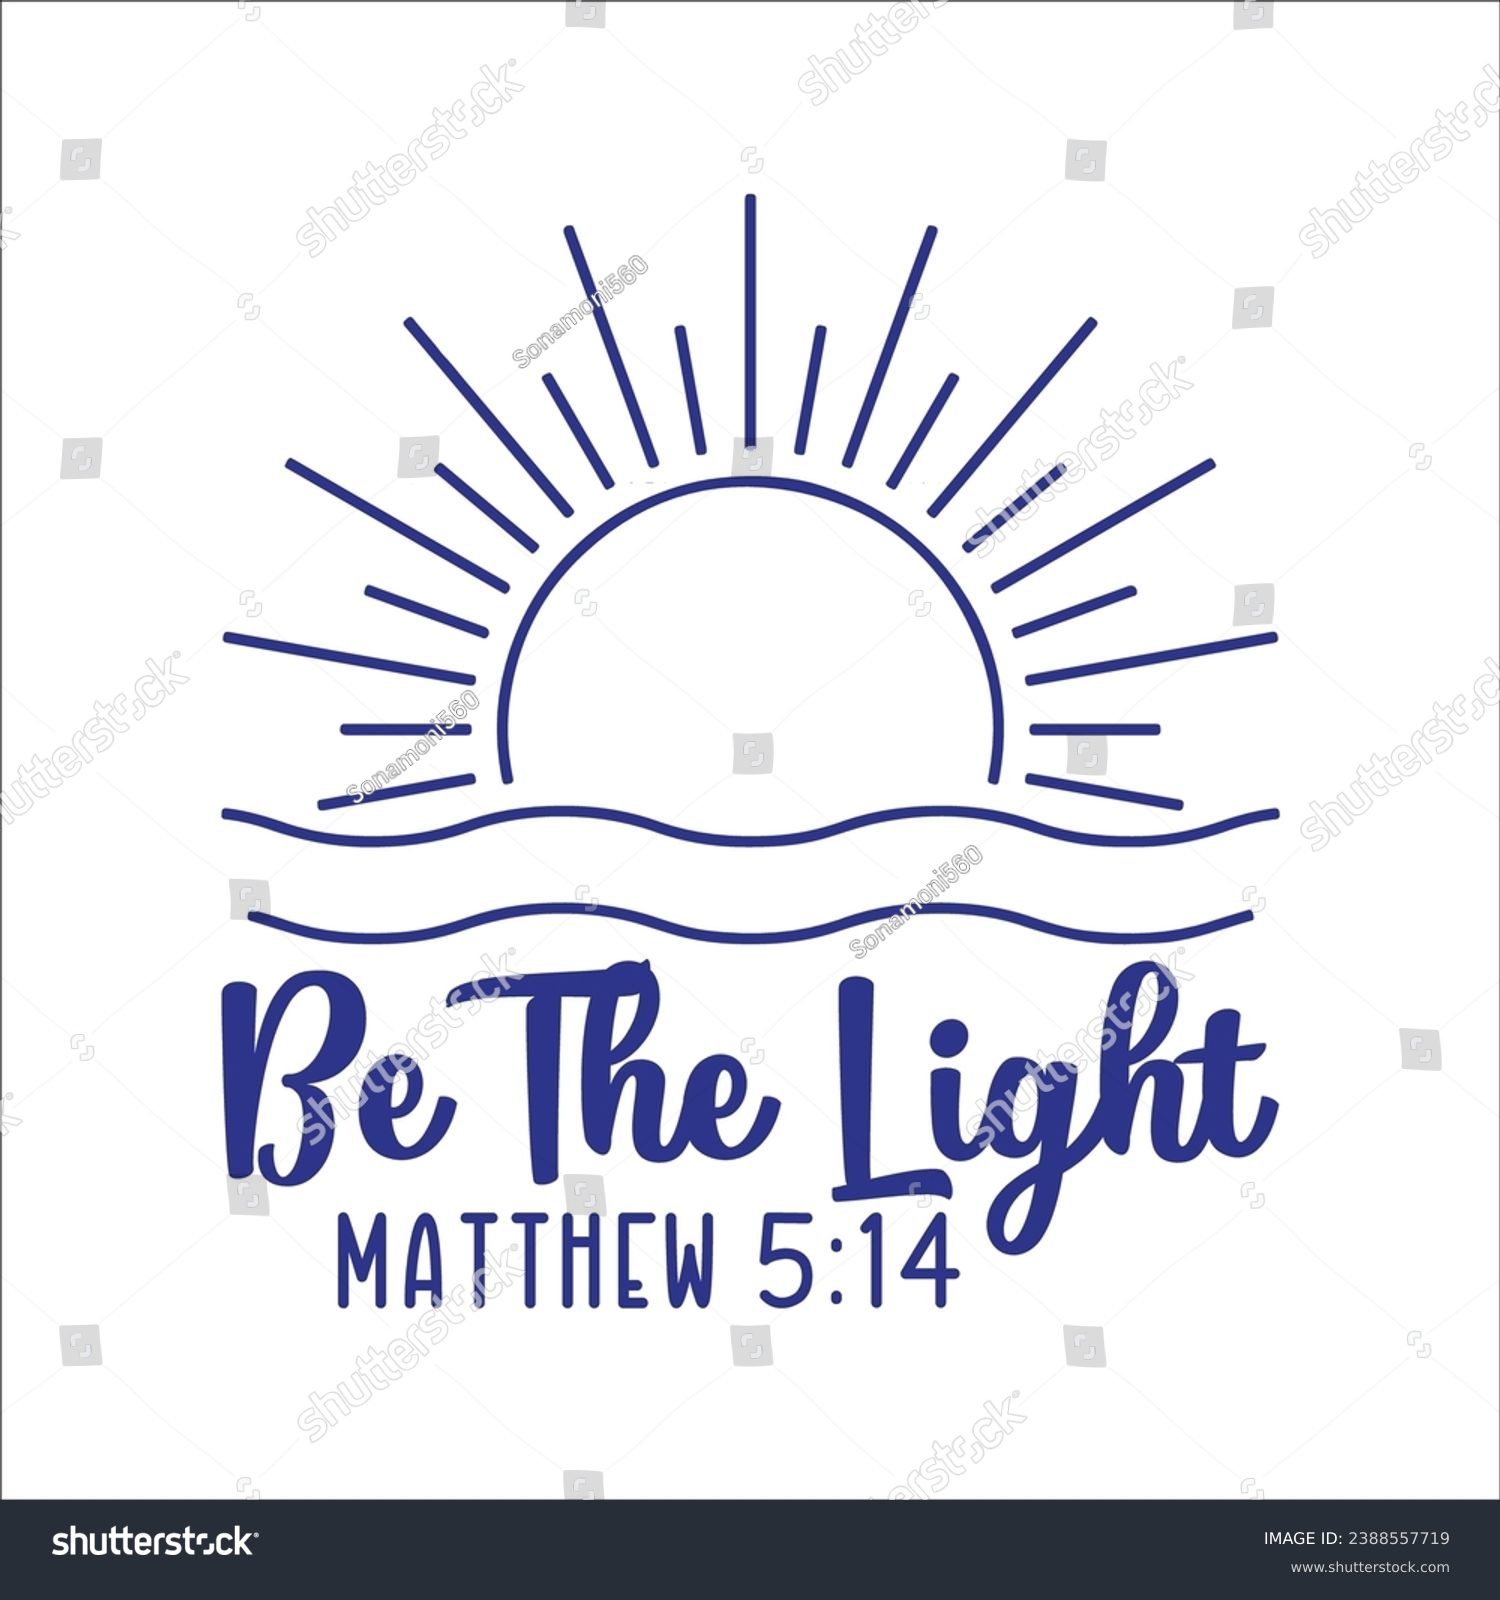 SVG of Christian t-shirt design. Here You Can find and Buy t-Shirt Design. Digital Files for yourself, friends and family, or anyone who supports your Special Day and Occasions. svg